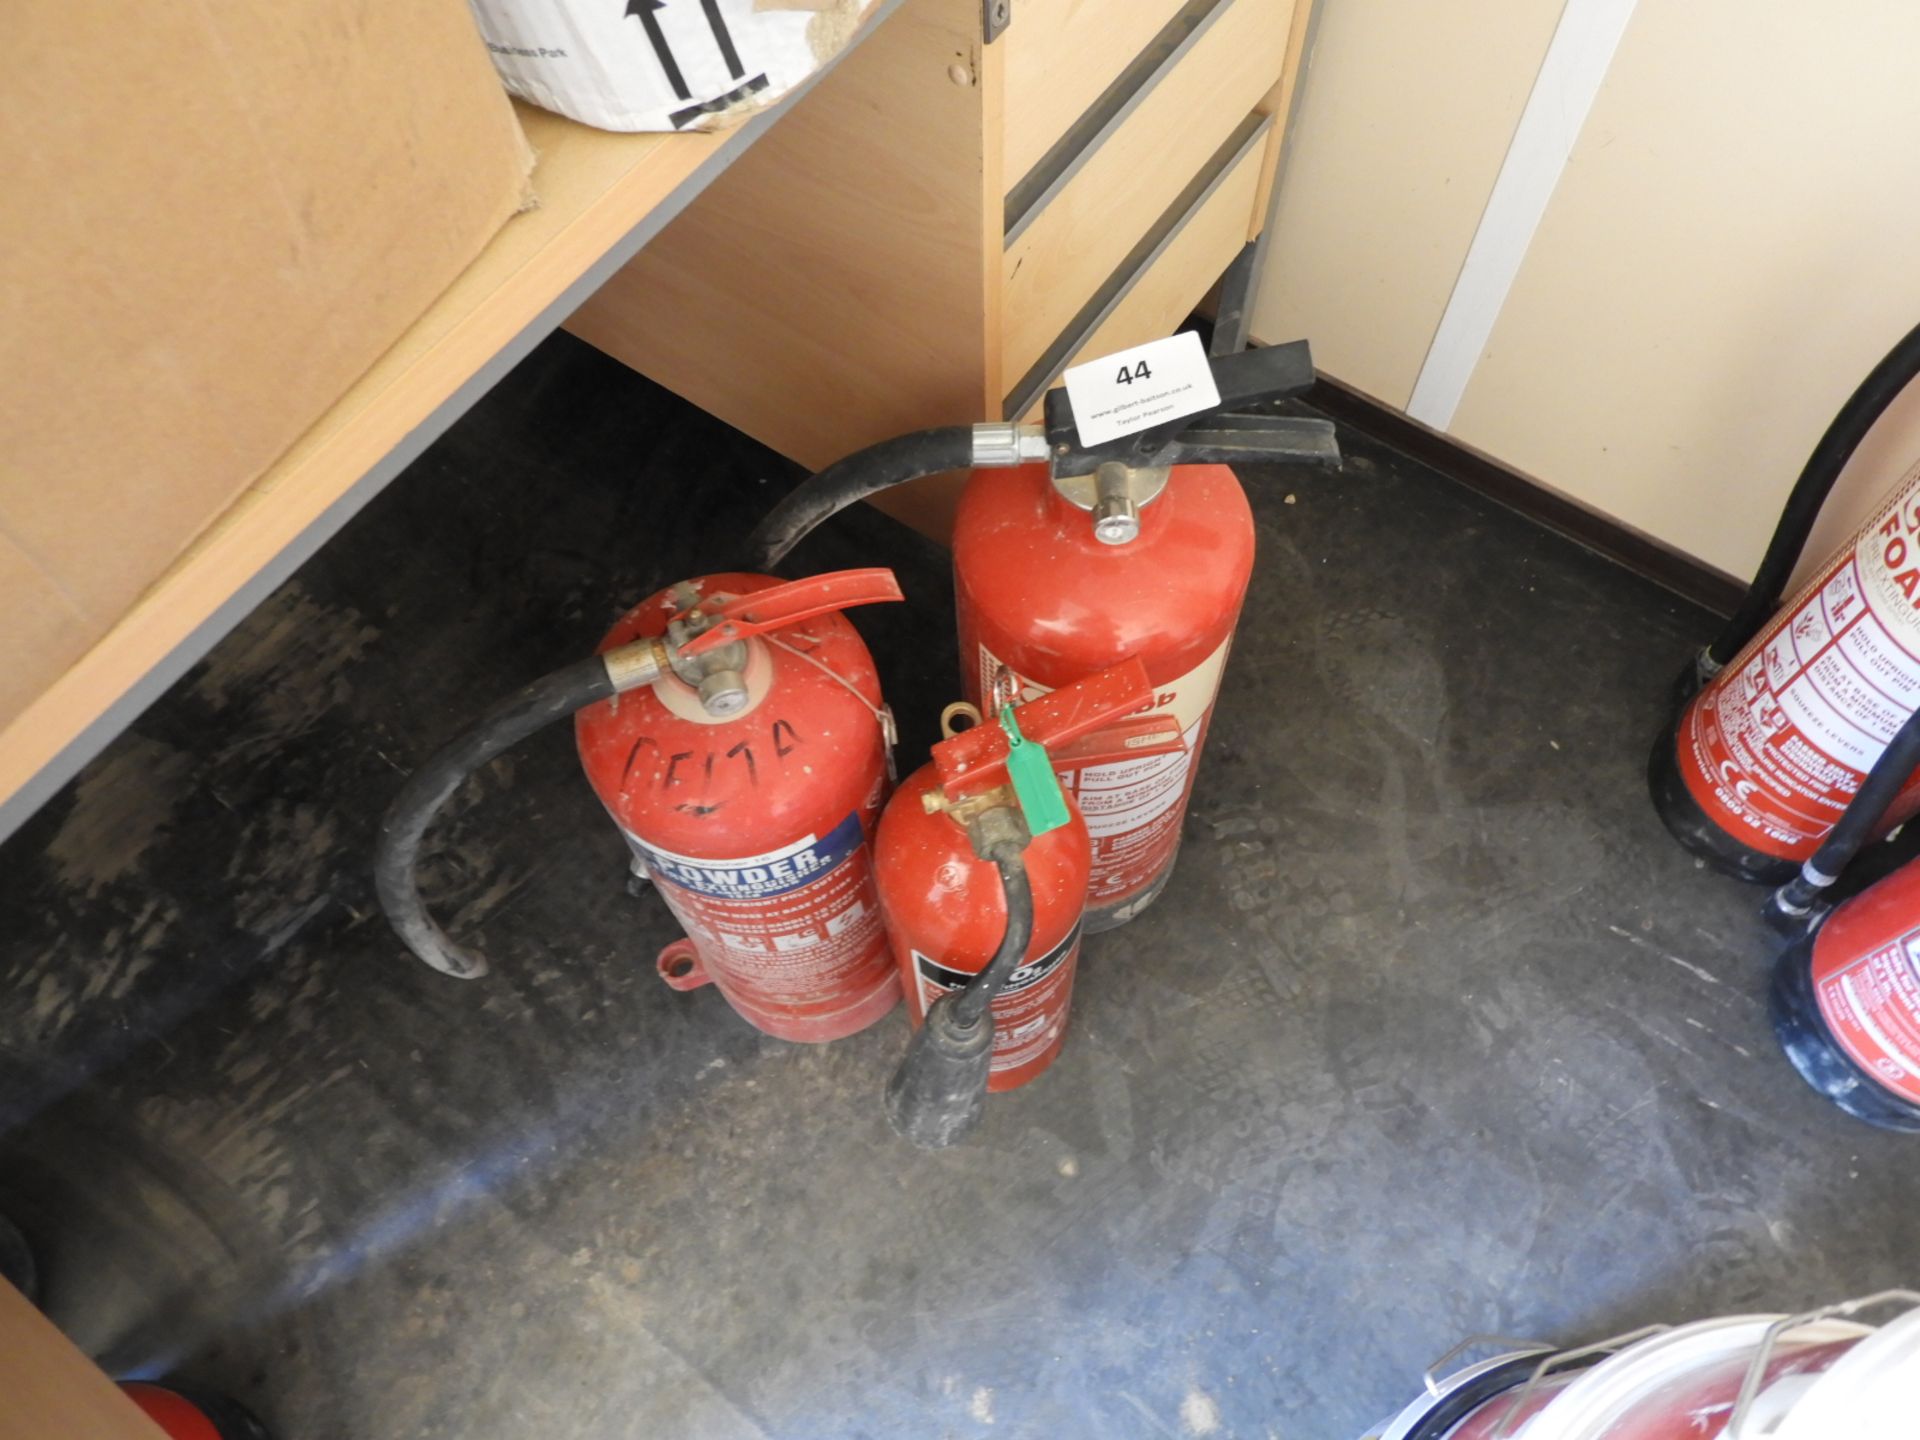 *Foam, CO2 and Dry Powder Fire Extinguishers